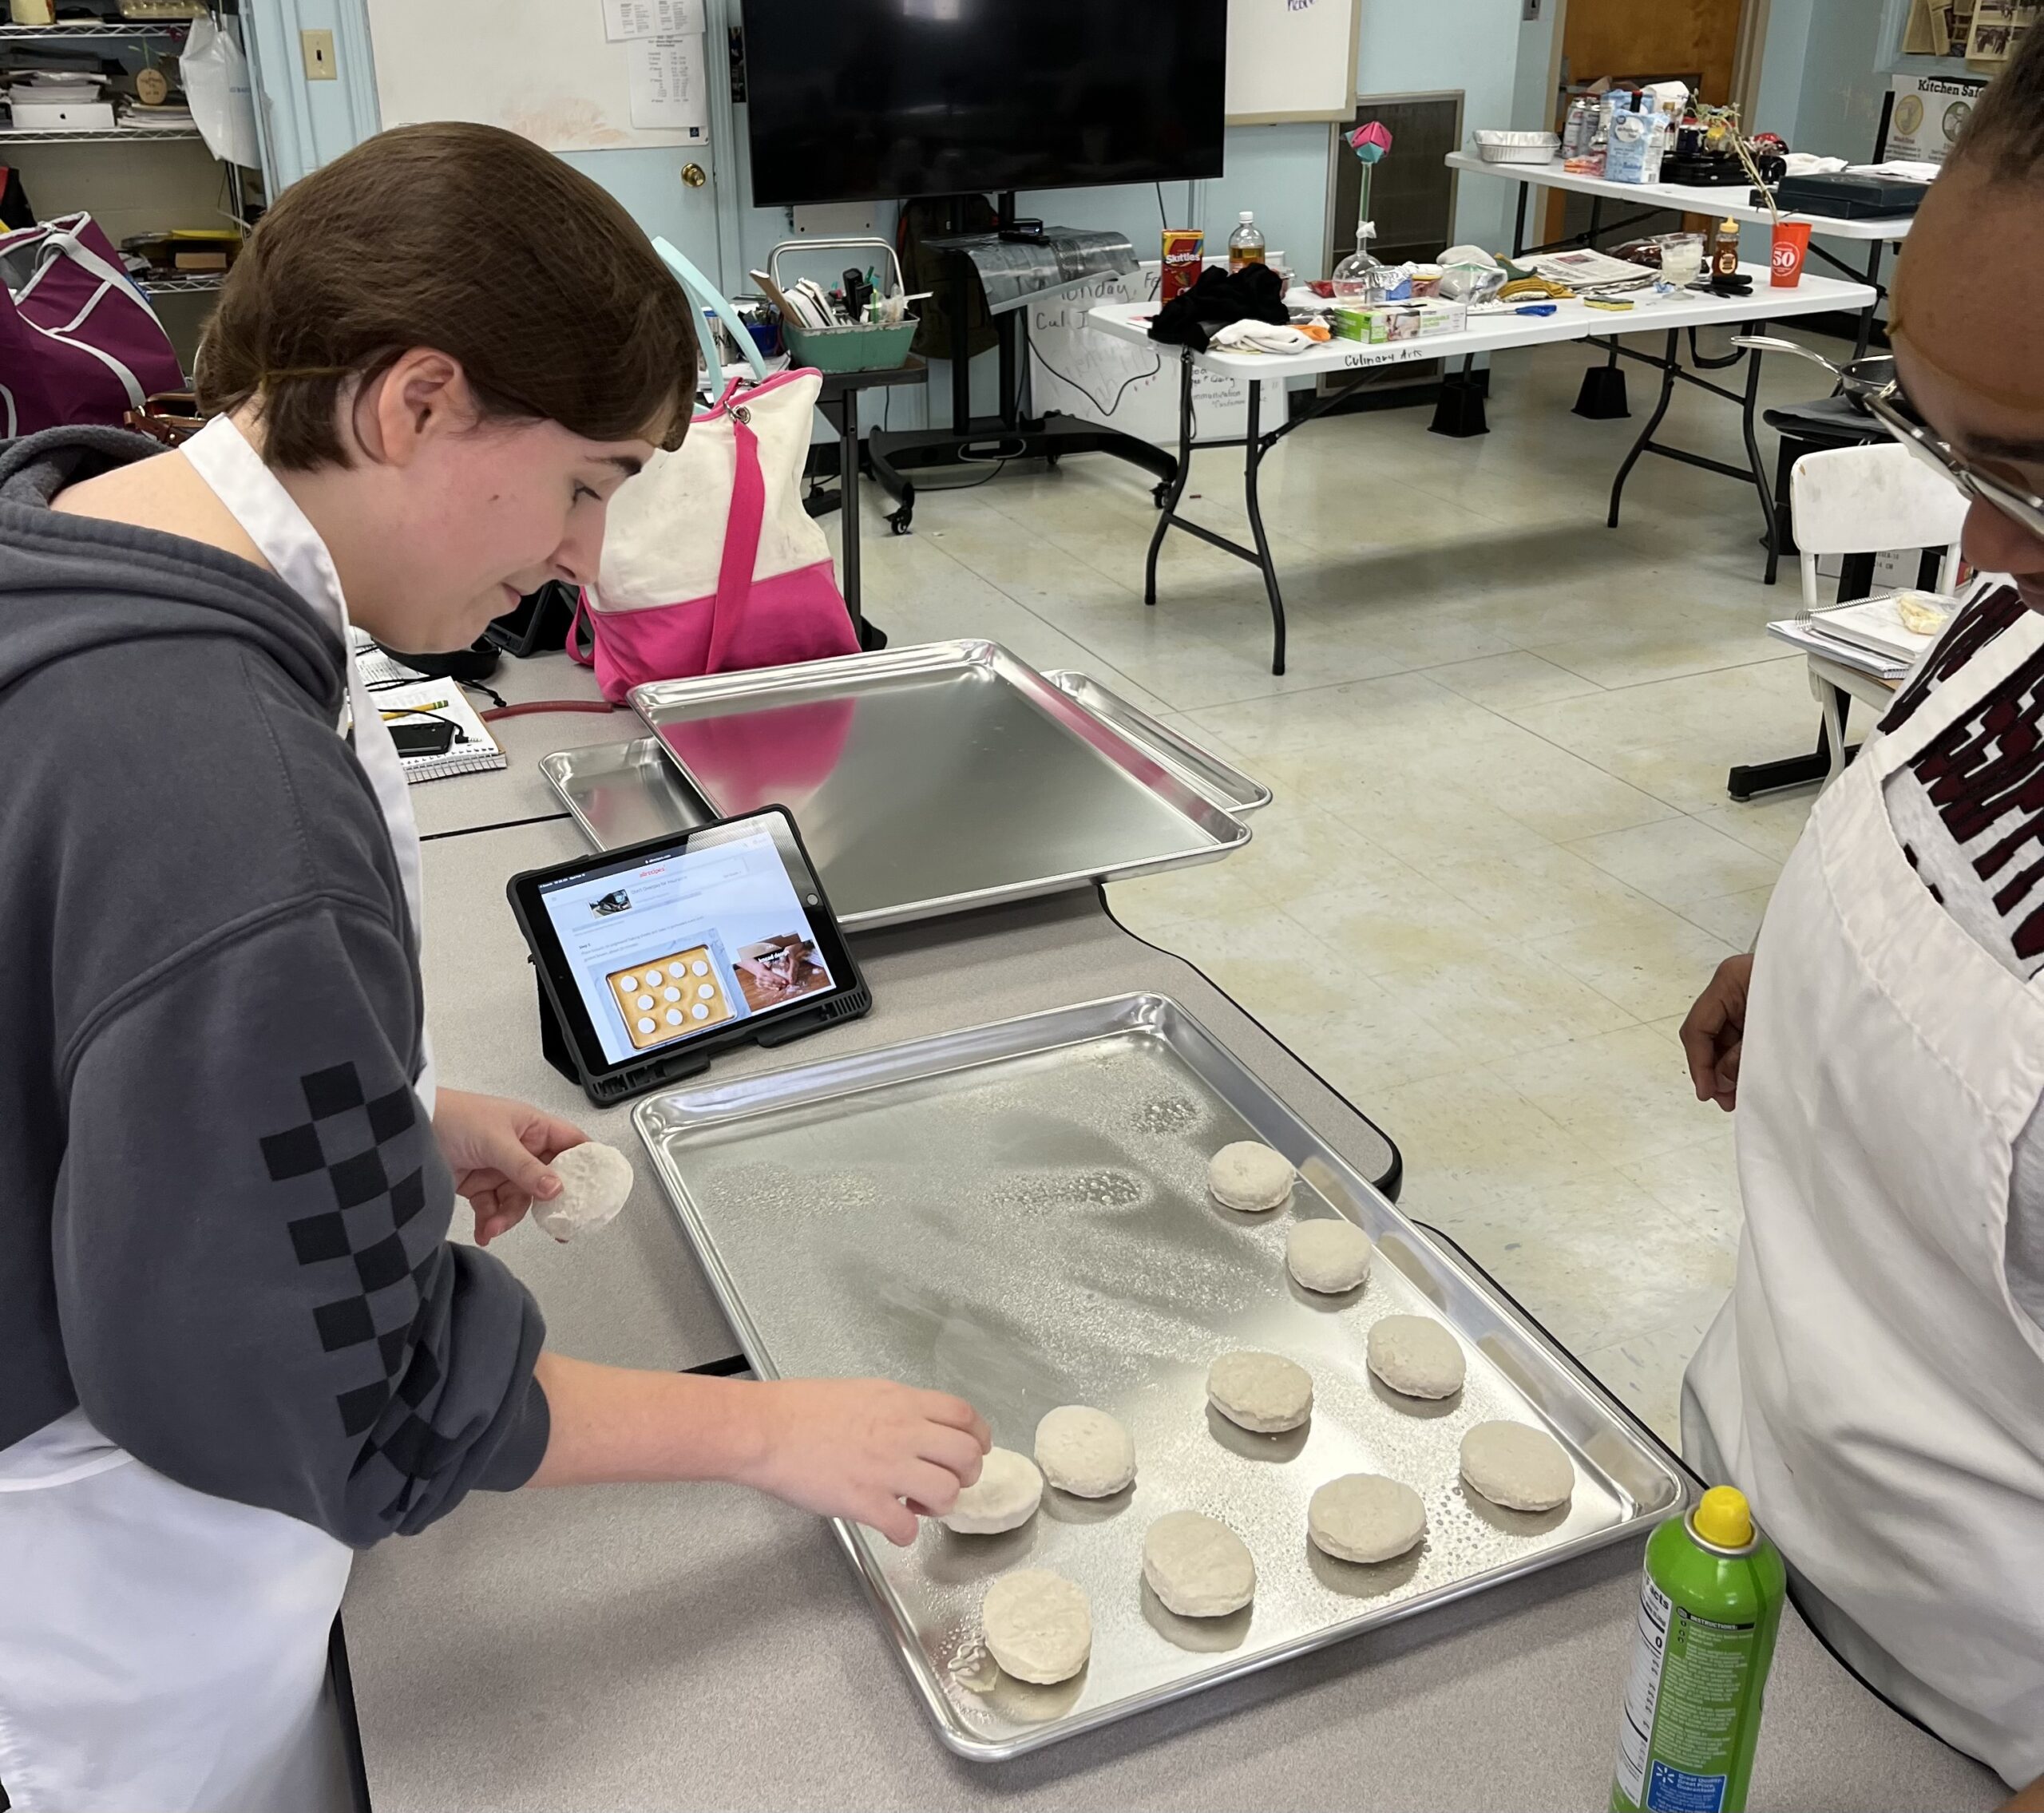 Students in Anita Alef's Culinary Arts program at the New Albany School of Career & Technical Education utilize newly acquired kitchen tools in a recent class lesson. These kitchen tools were purchased through a school grant made possible by the Dean Provence Endowment for Excellence in Education.